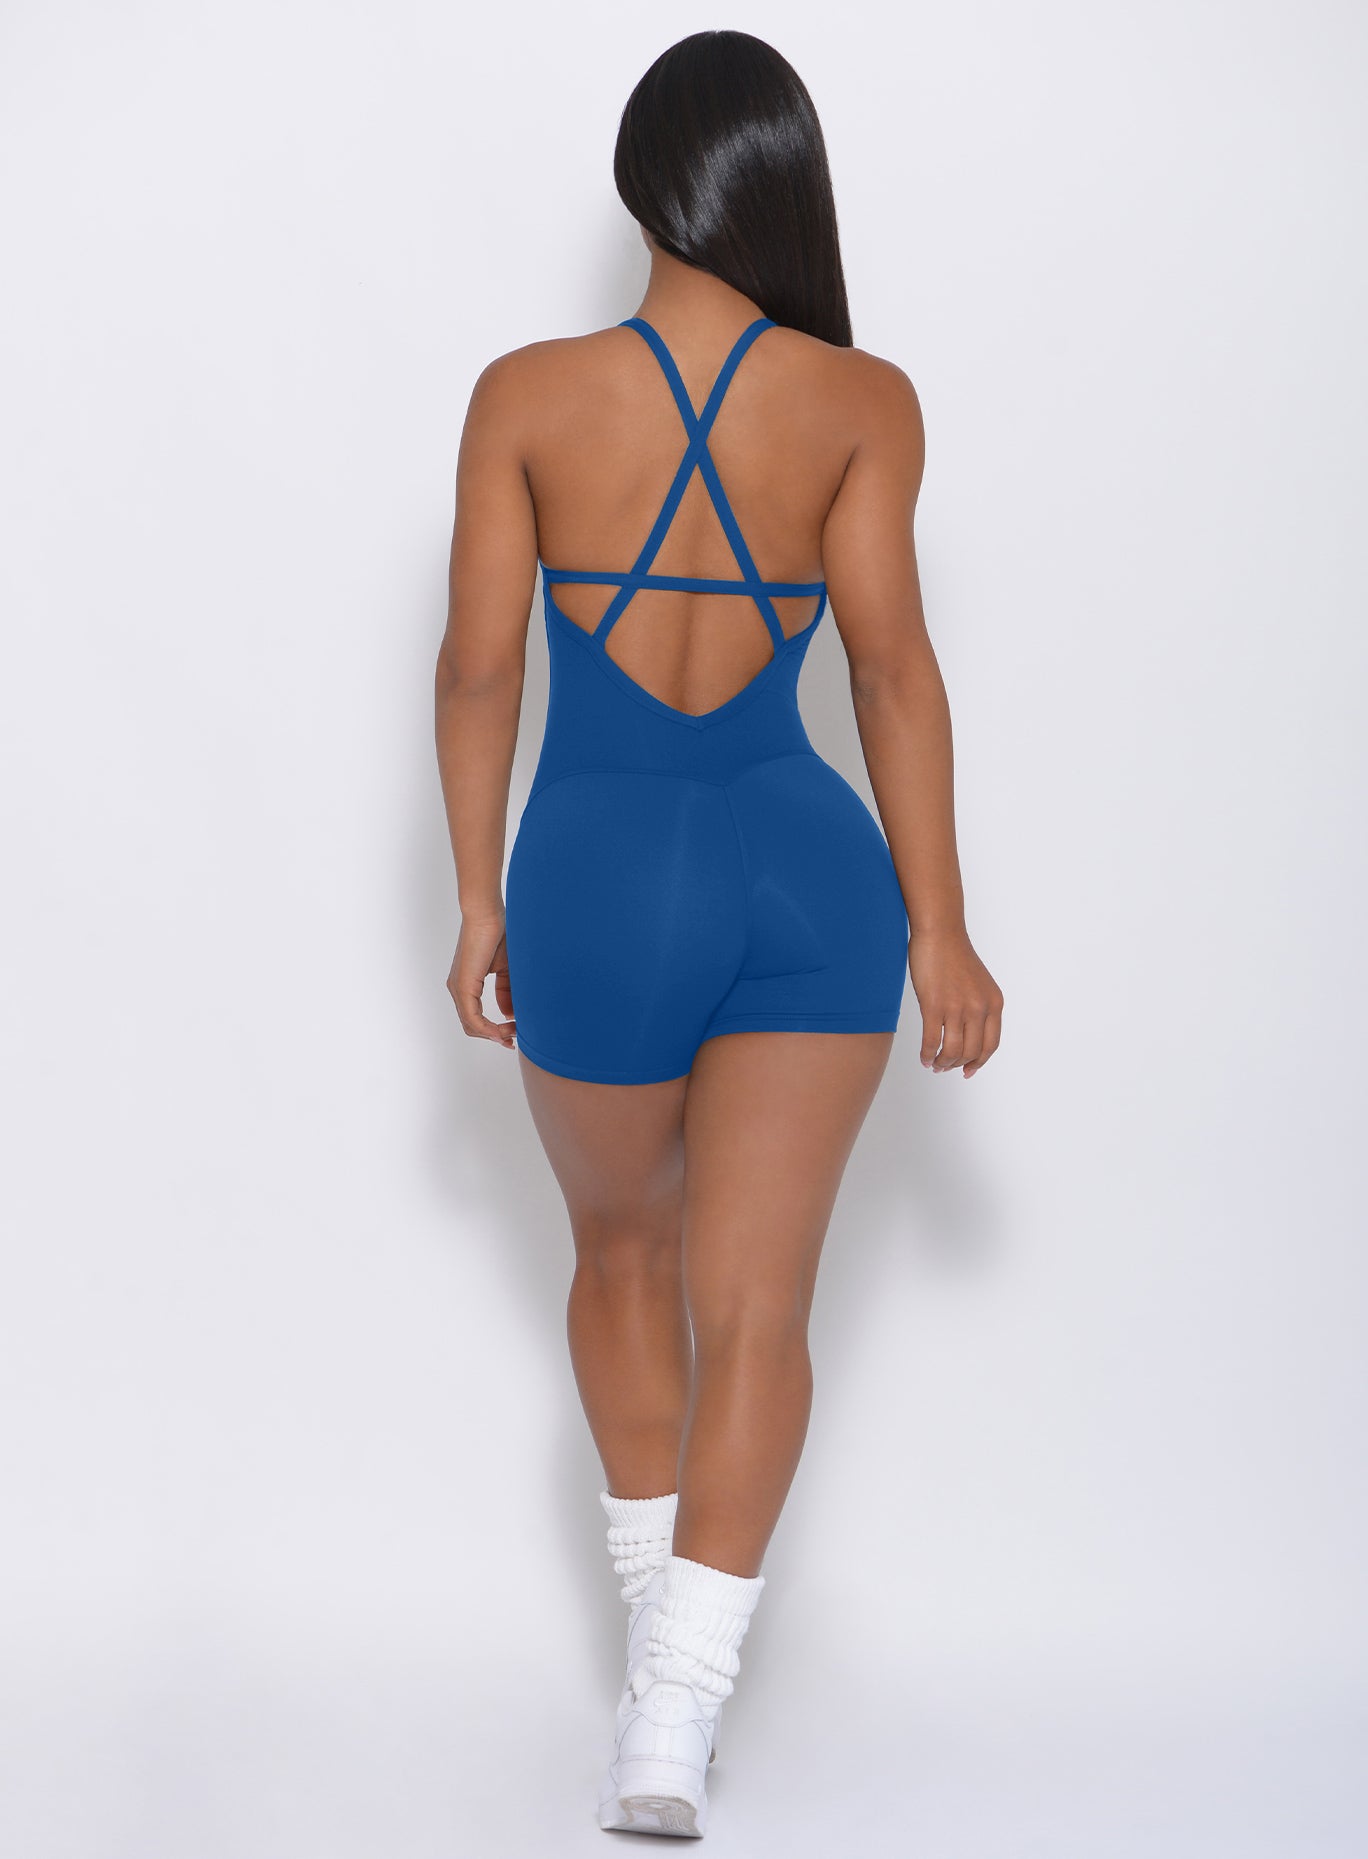 Back view of the model in our cobalt blue bodysuit shorts 